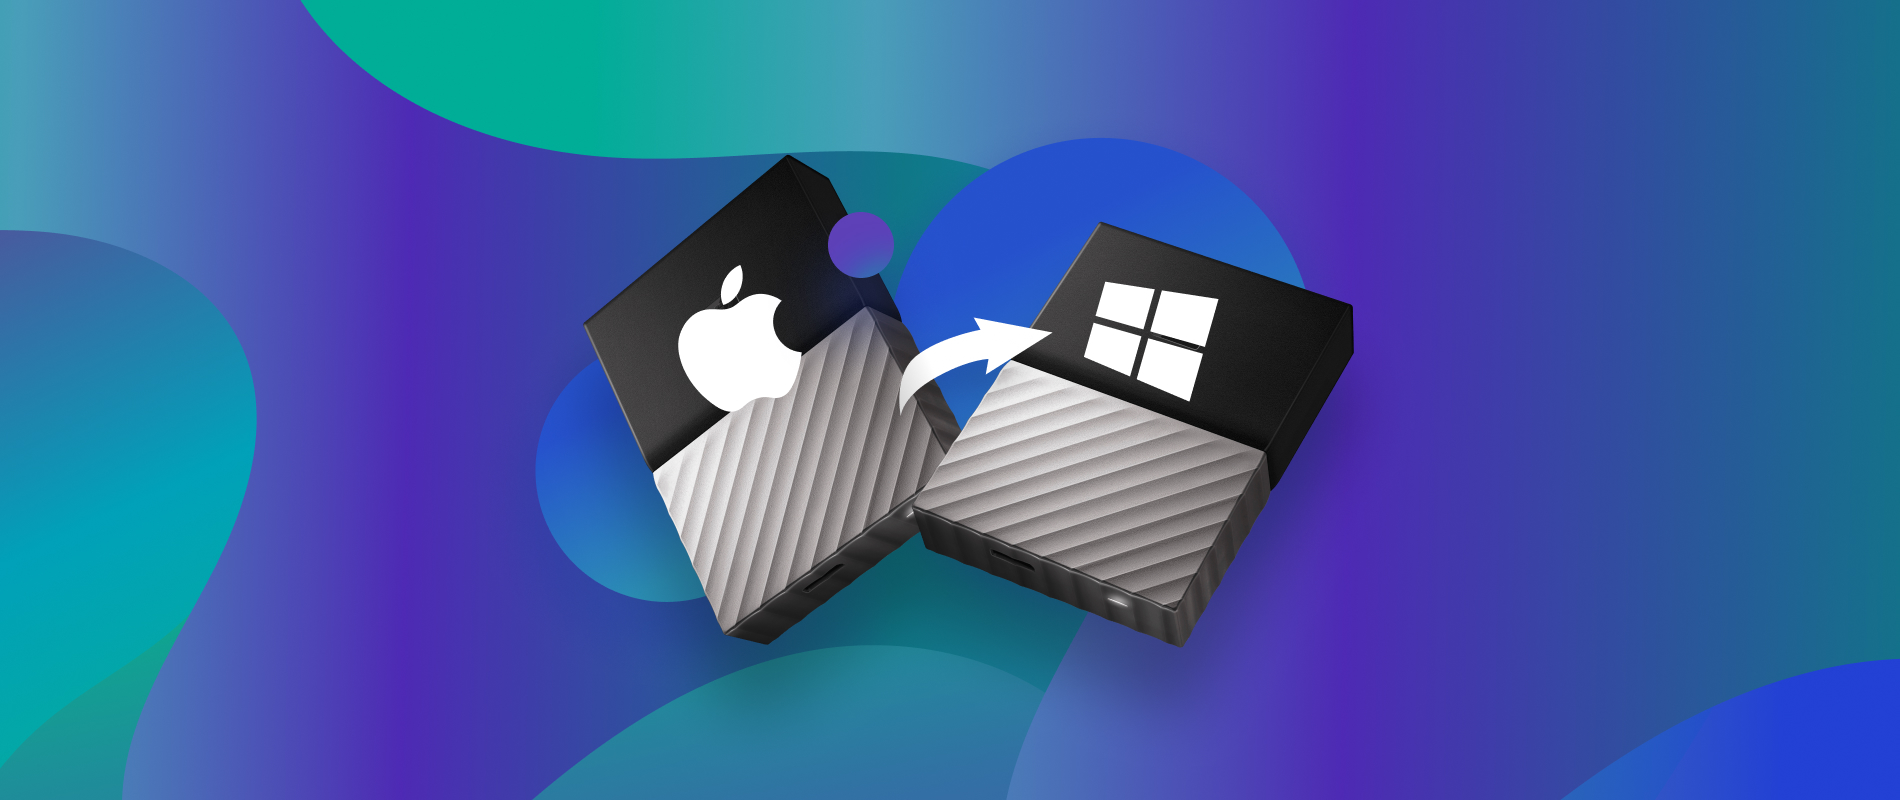 delikatesse blomst Spectacle How to Convert Mac Hard Drive to Windows Without Losing Data